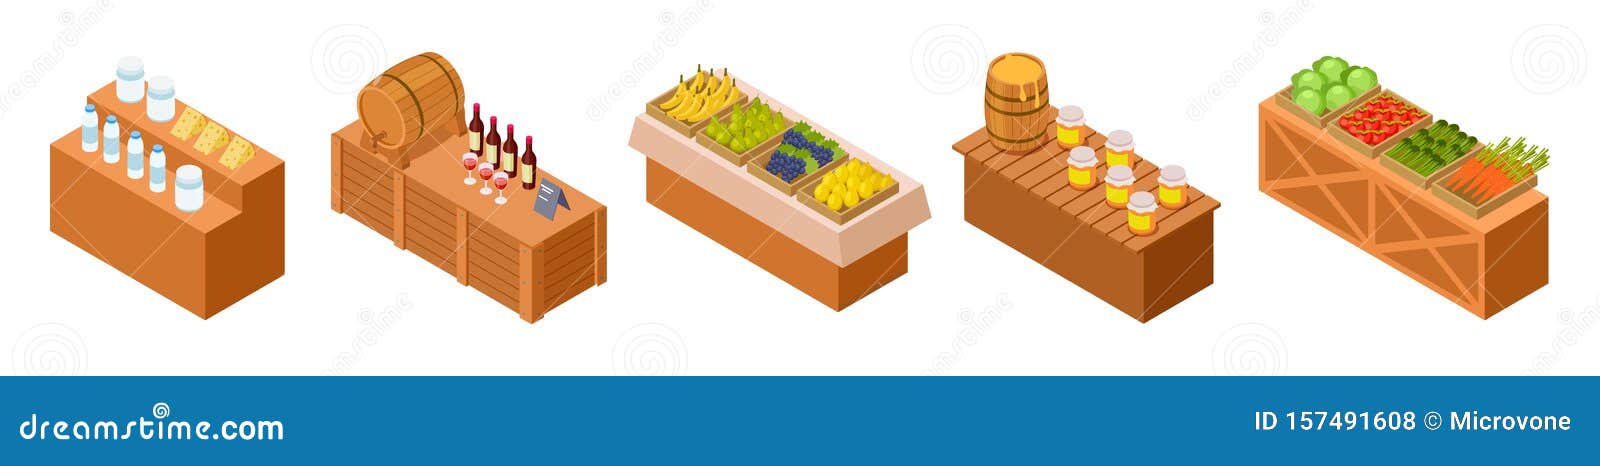 farmers market stalls. isometric traditional meal, vegetables and fruit.  wooden counters with fresh goods